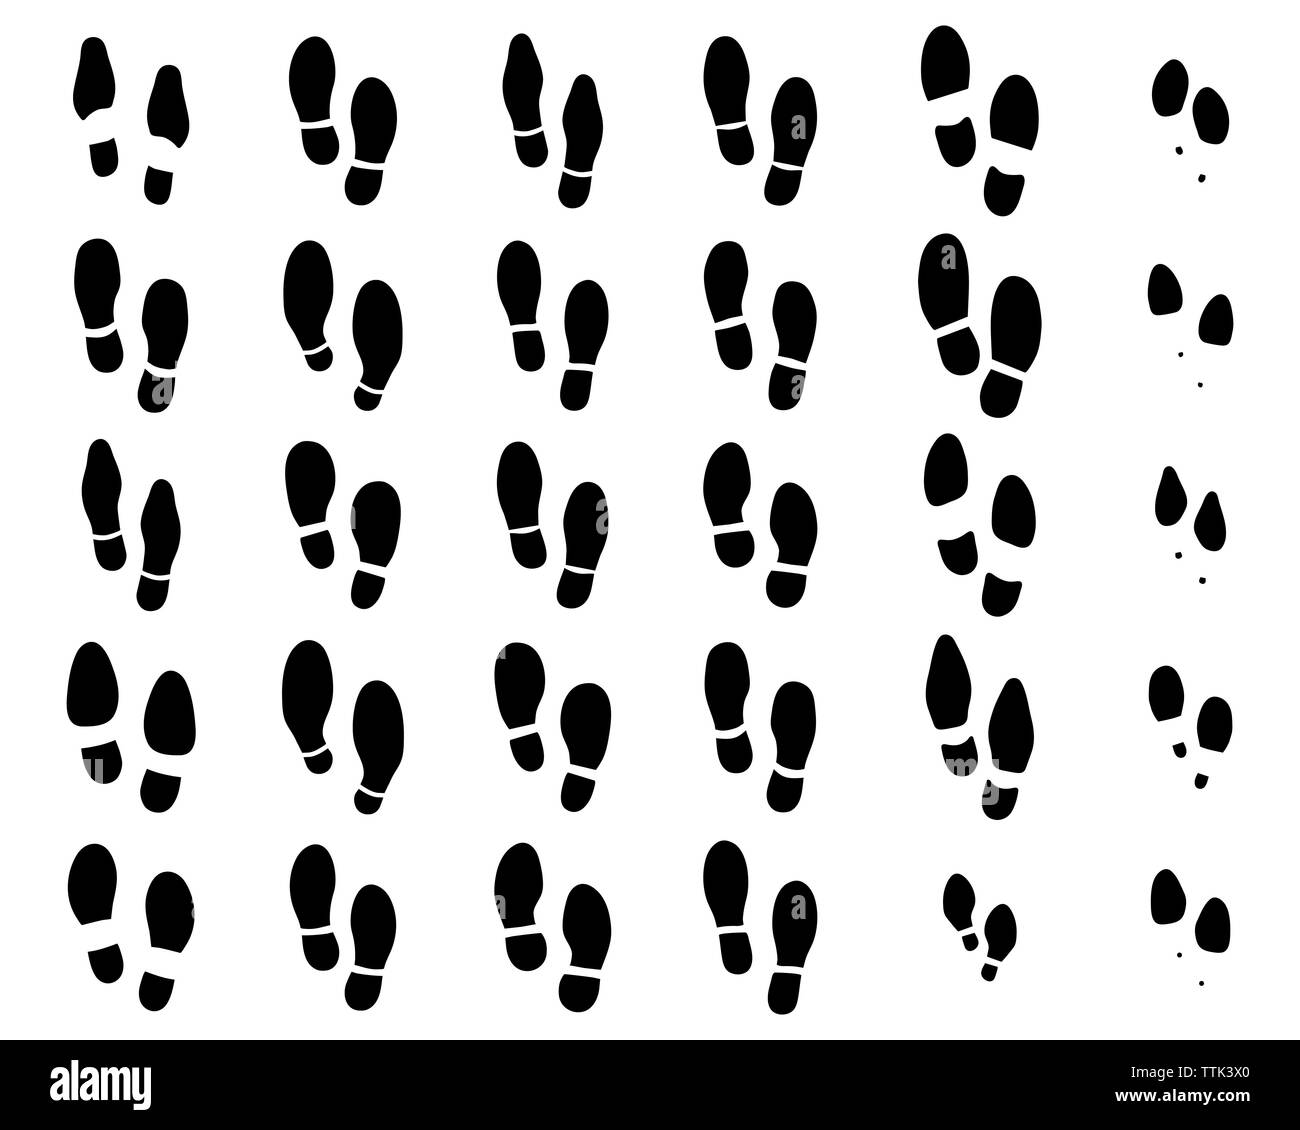 Black prints of shoes on a white background Stock Photo